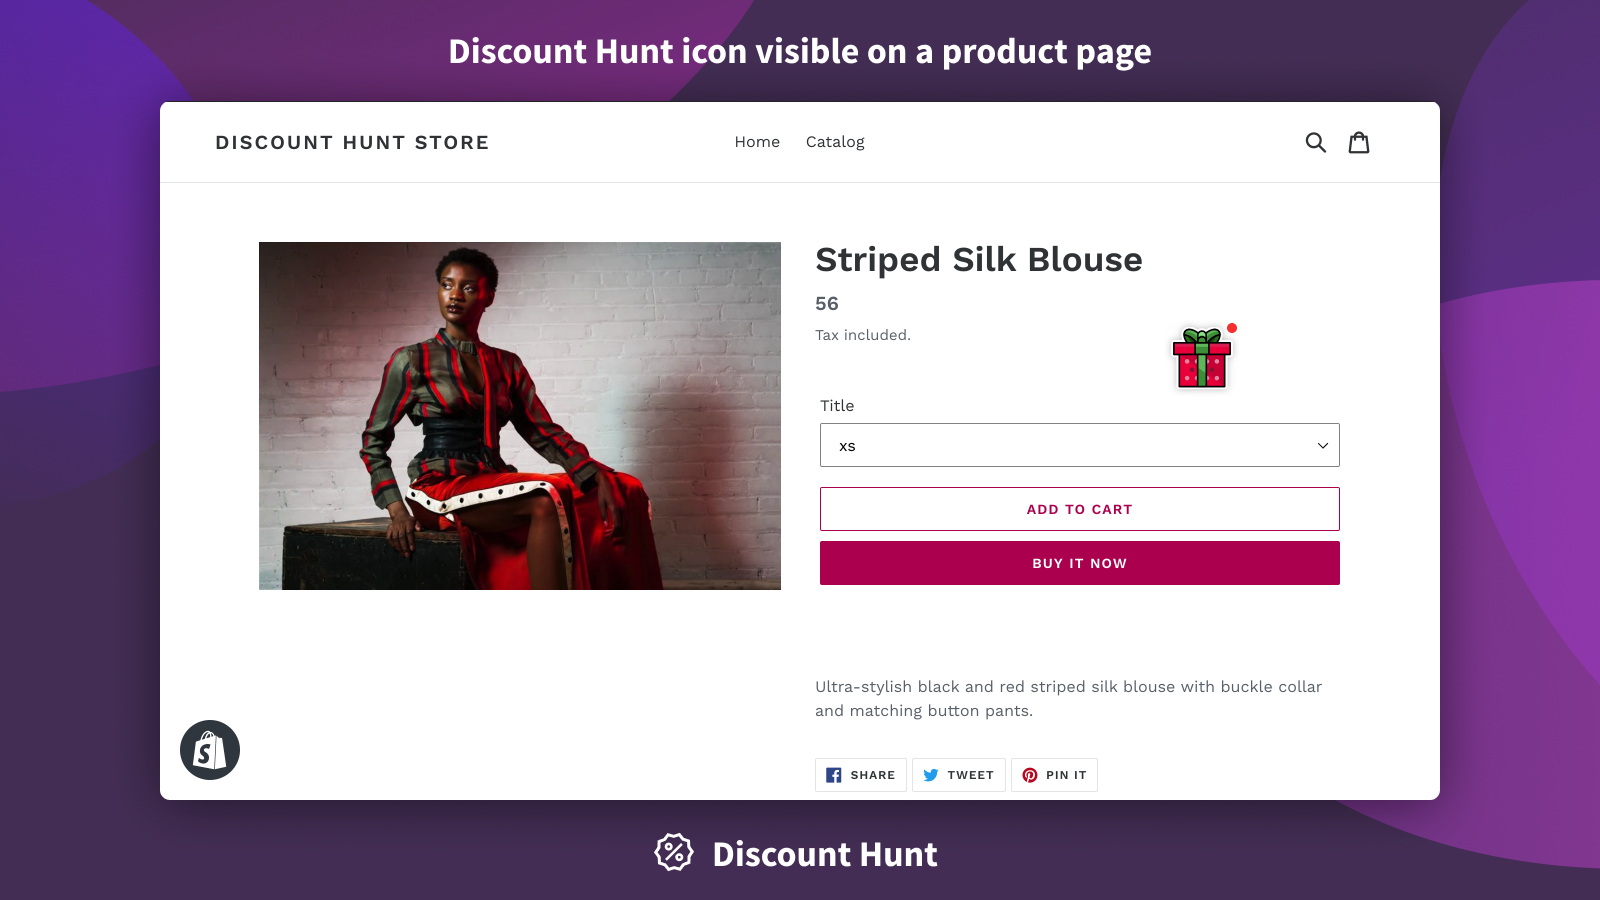 Discount Hunt icon visible on a product page